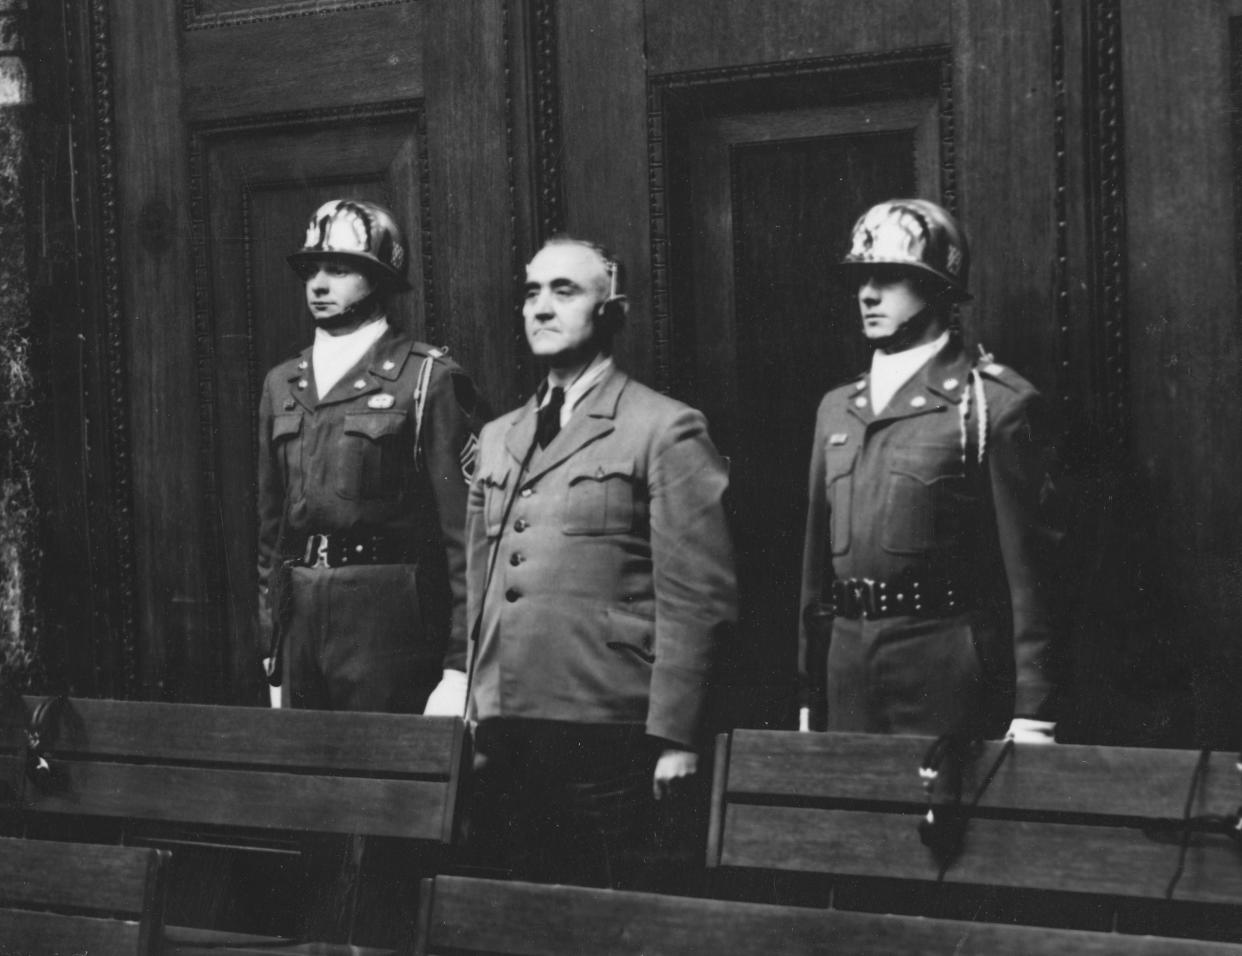 FILE - In this April 14, 1949 file photo, defendant Gottlob Berger, former chief of the SS head office, is sentenced to 25 years imprisonment, flanked by Sgt. 1st class Thomas H. Andress from Palestine, Texas, member of the honor guard 16th inf., left, and an not identified honor guard in Nuremberg, Germany. Germany marks the 75th anniversary of the landmark Nuremberg trials of several Nazi leaders and in what is now seen as the birthplace of a new era of international law on Friday, Nov. 20, 2020. (AP Photo/Albert Riethausen, file)